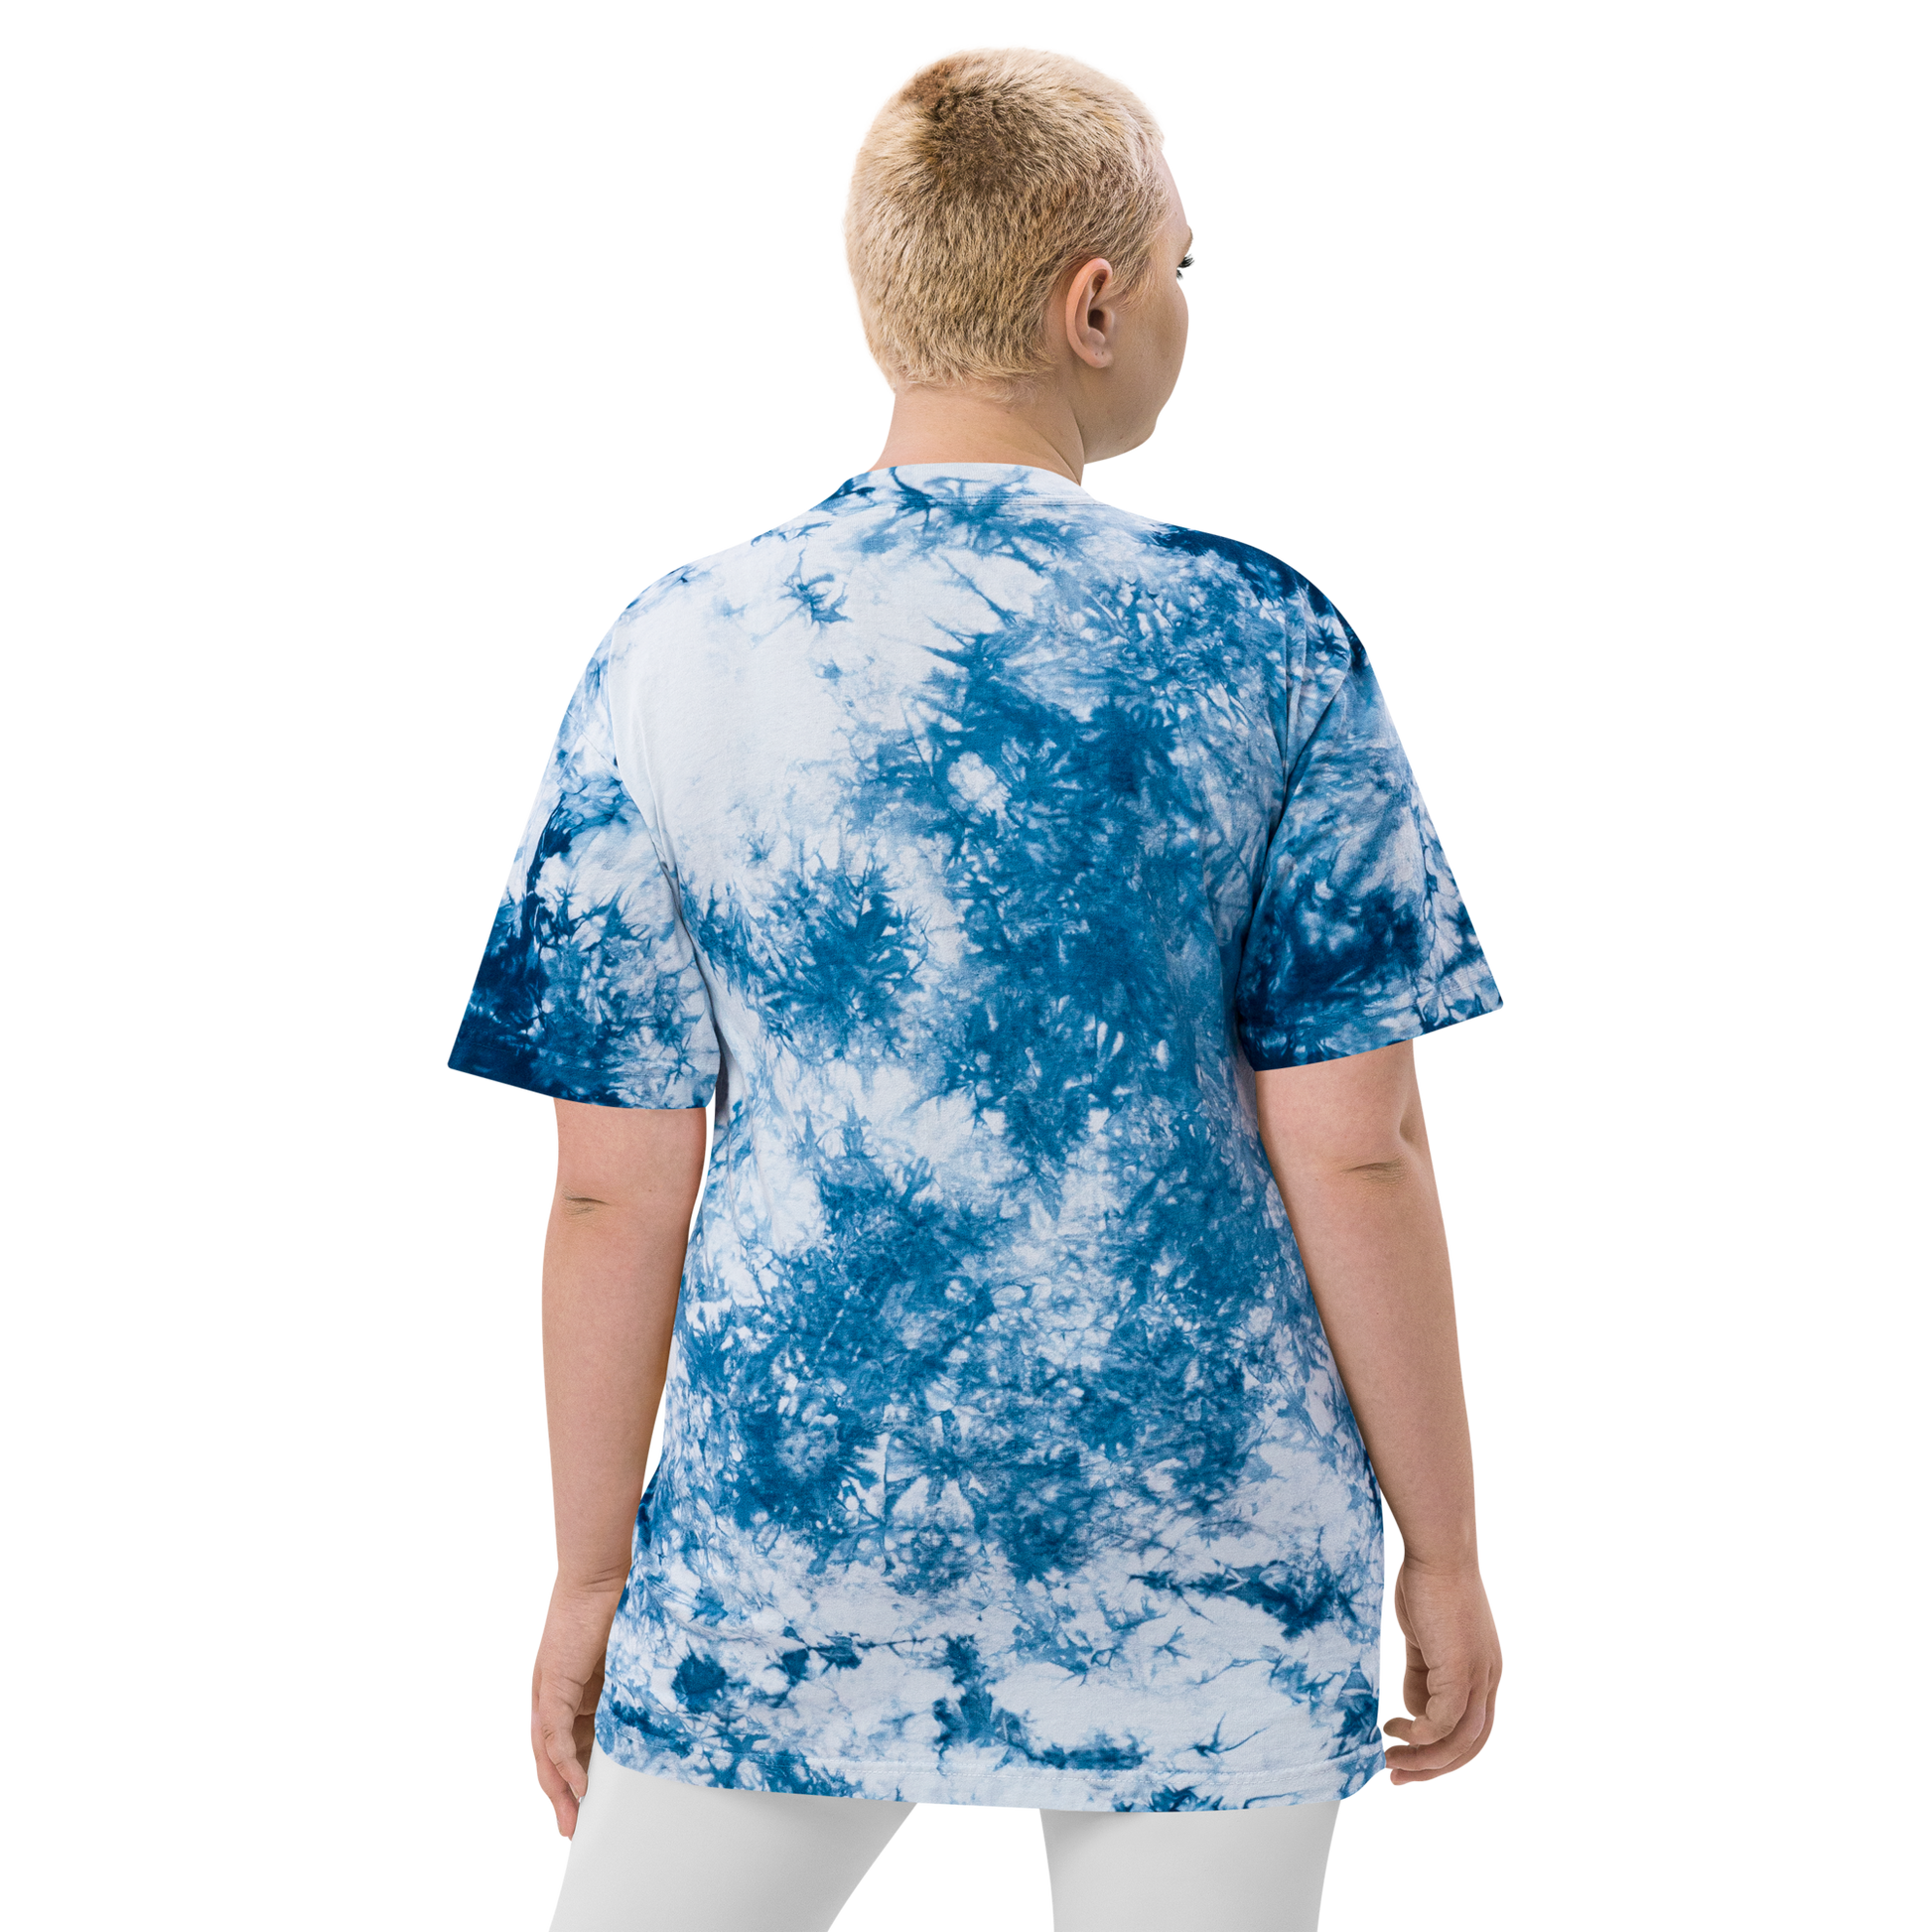 Crossed-X Oversized Tie-Dye T-Shirt • YVR Vancouver • YHM Designs - Image 09